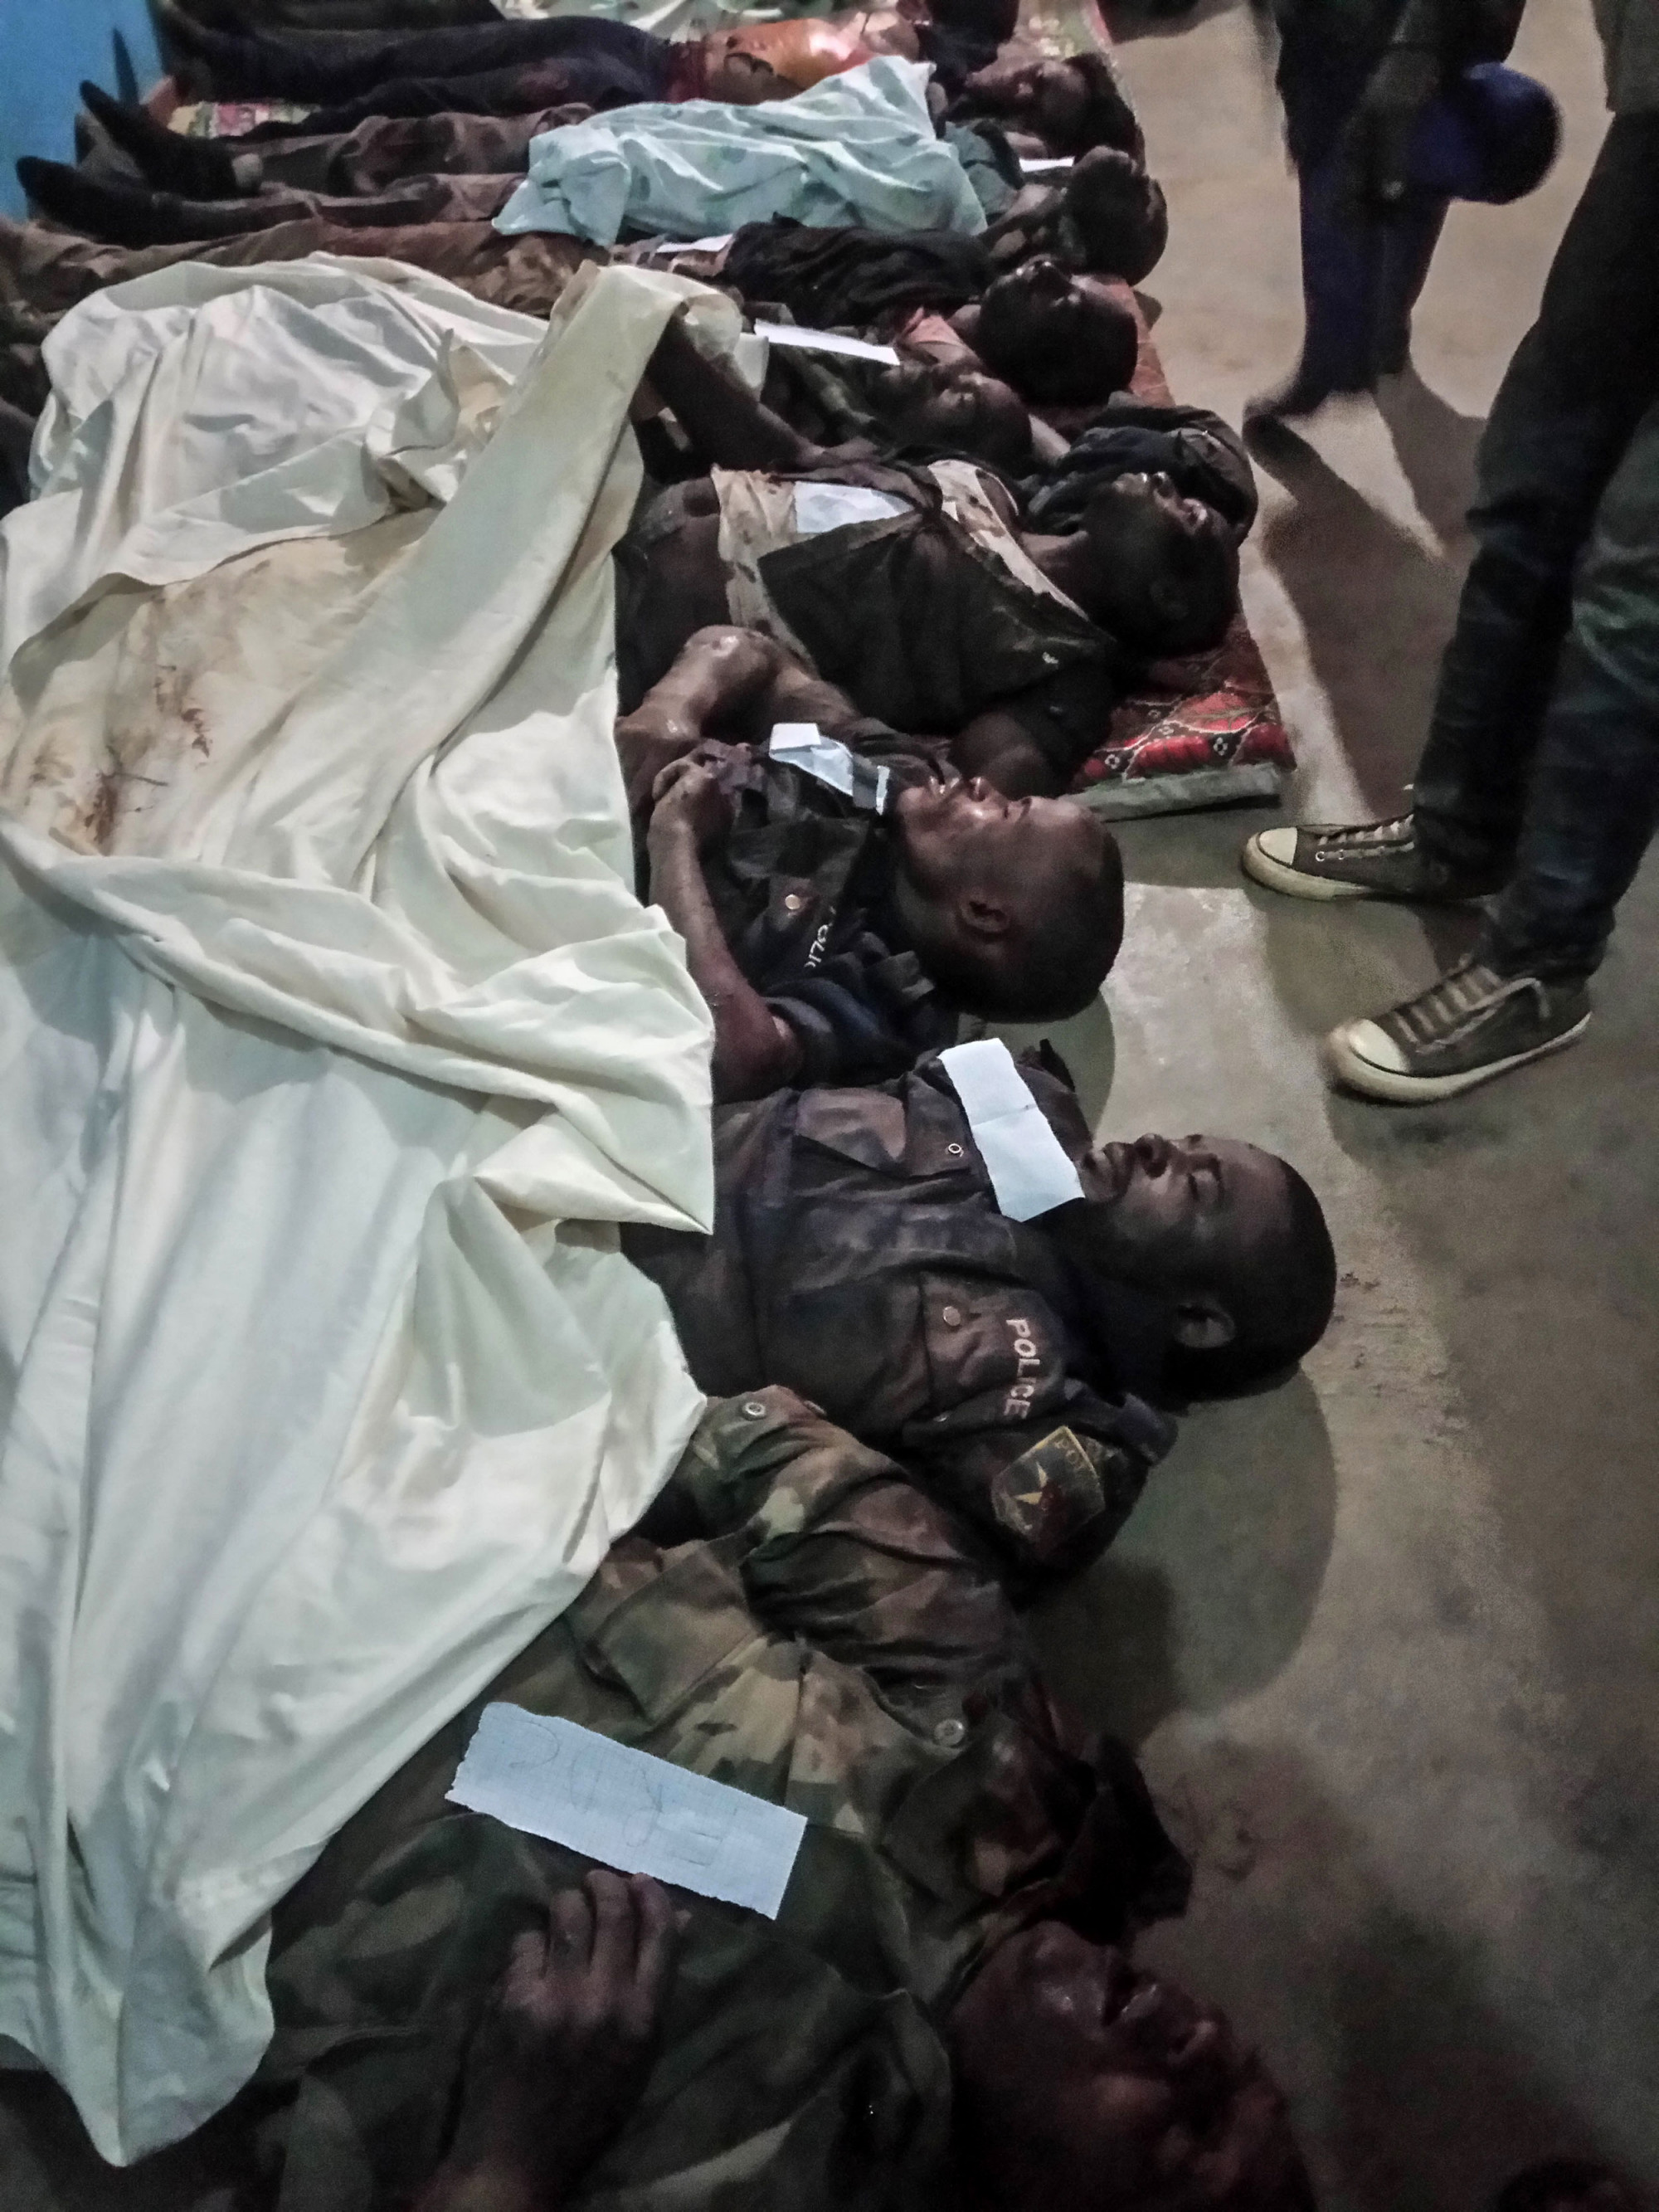 Bunia, DRC, July 2020. The bodies of three Congolese policemen and four government soldiers lie at the morgue in the city of Bunia in Congo’s northeastern Ituri Province after 11 people, including a provincial deputy and civilians, were killed by gunmen in an ambush at the village of Matete in Djugu territory on July 4. The attack was the latest blamed on assailants from the Cooperative for the Development of Congo (CODECO), an armed political-religious sect drawn from the Lendu ethnic group that has targeted rival members of the Hema community. CODECO and other Lendu fighters are accused by The Office of the UN High Commissioner for Human Rights of pursuing “a strategy of slaughtering local residents—mainly the Hema, but also the Alur—since 2017” to control natural resources in the region. © Dieudonne Dirole for Fondation Carmignac